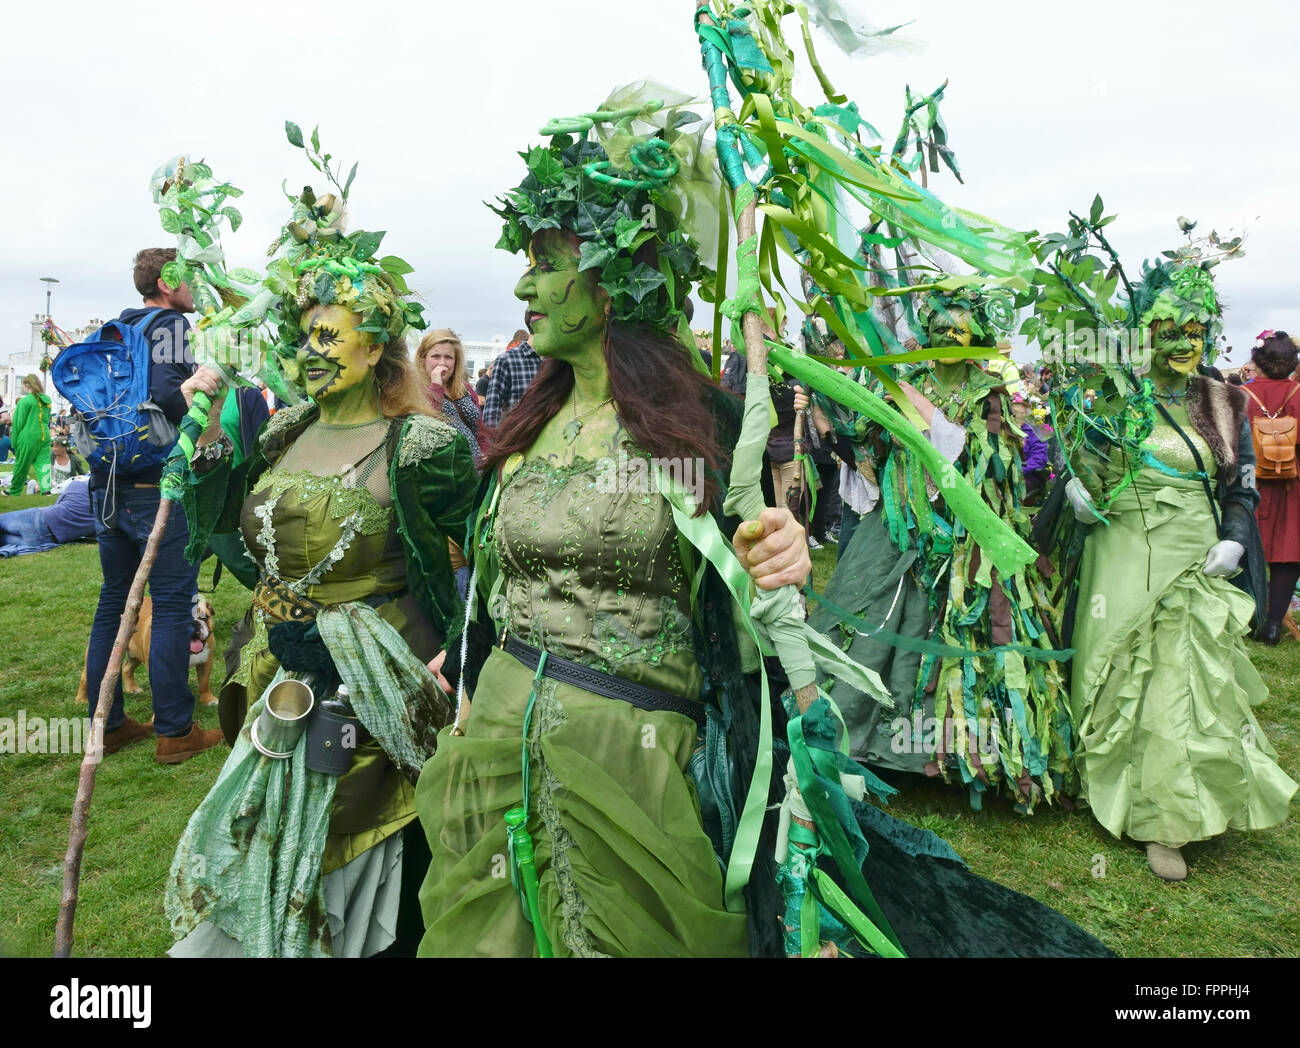 Elaborately costumed green May Day revellers at the annual Jack-in-the-Green festival, Hastings, East Sussex, England, UK, GB Stock Photo